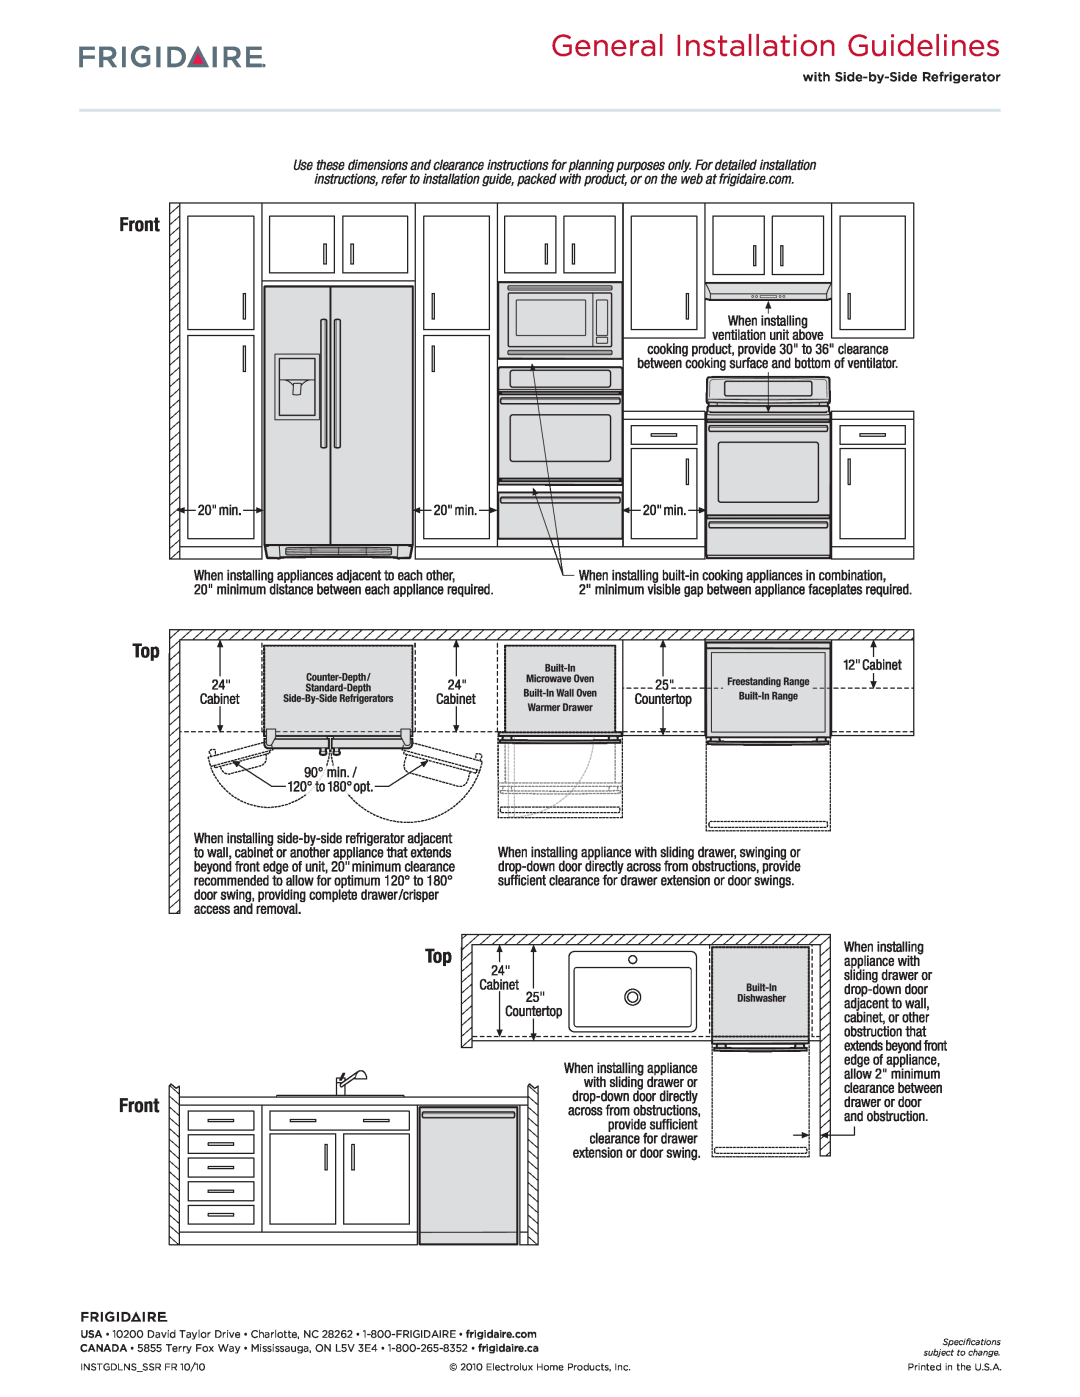 Frigidaire FGHC2378L dimensions General Installation Guidelines, Top Front 